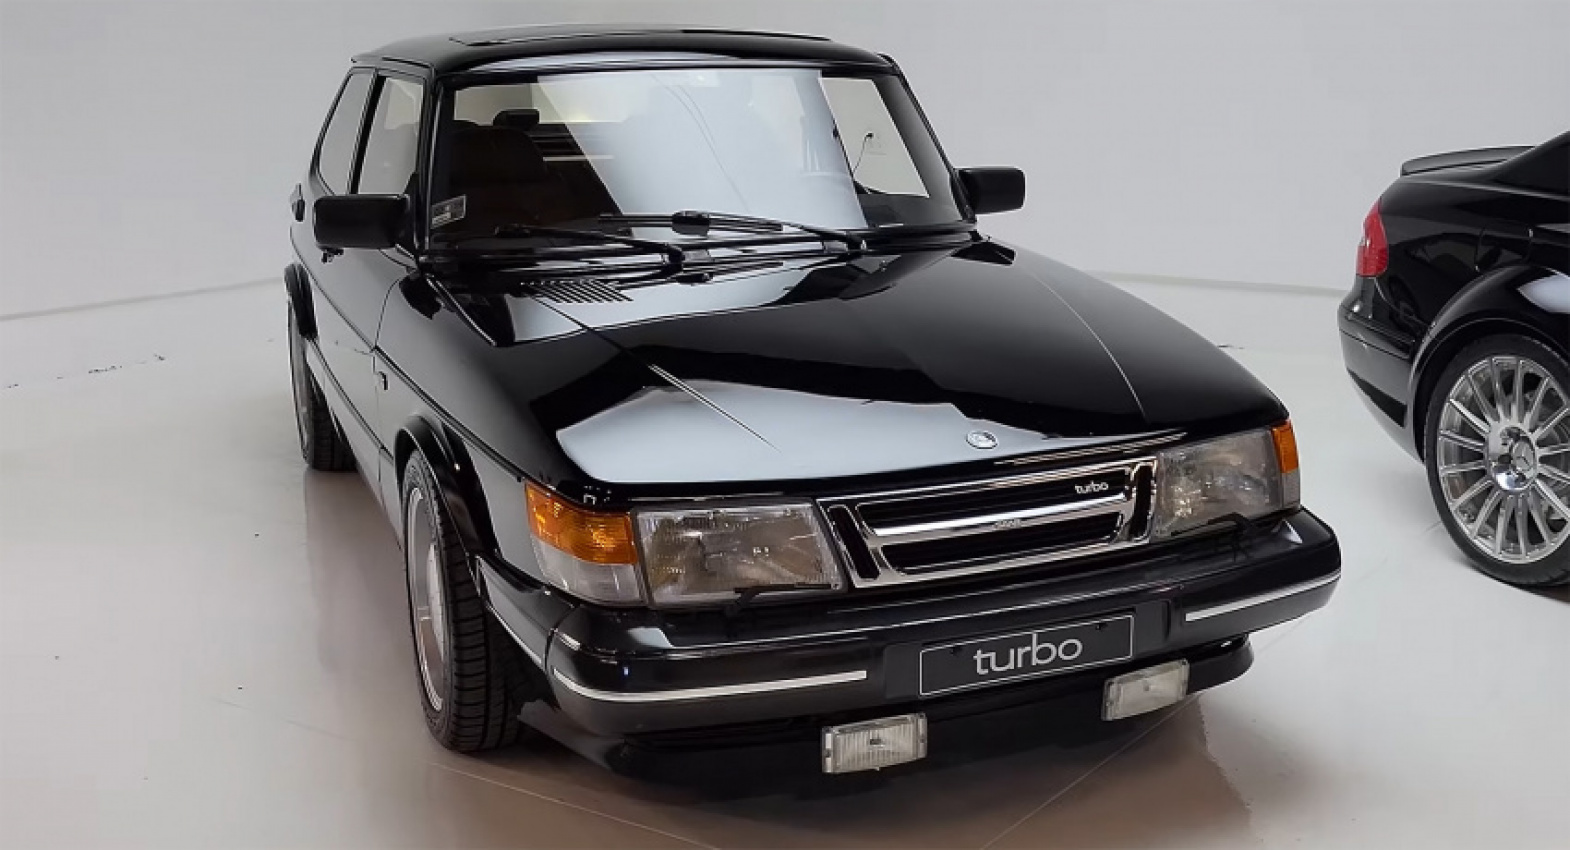 autos, cars, news, ram, saab, detailing, saab 900, saab videos, video, detailer breathes new life into a saab 900 turbo with dry ice cleaning and ceramic coating